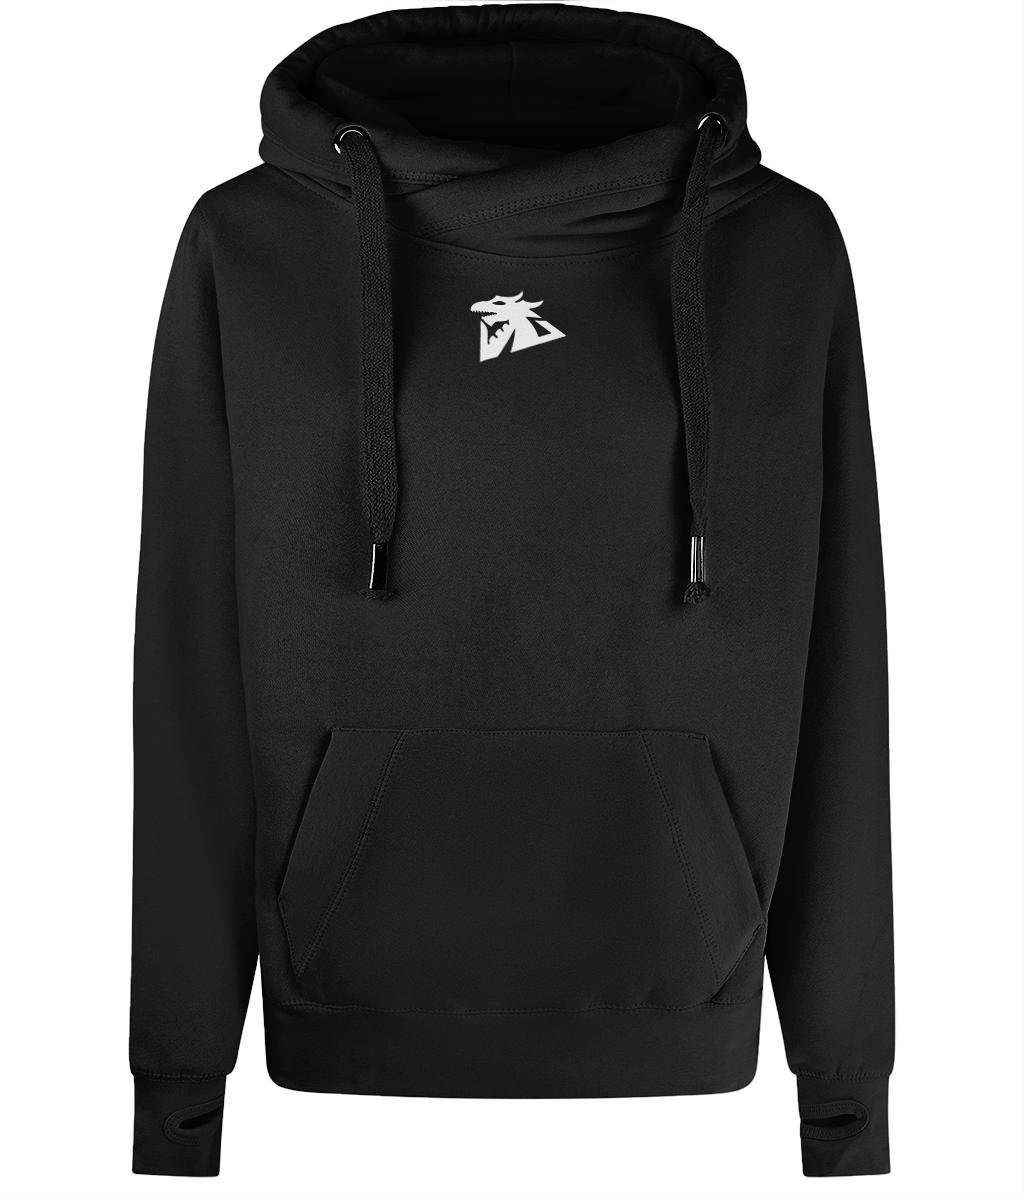 PERSEVERE AND CONQUER MKII HEAVYWEIGHT HOODIE